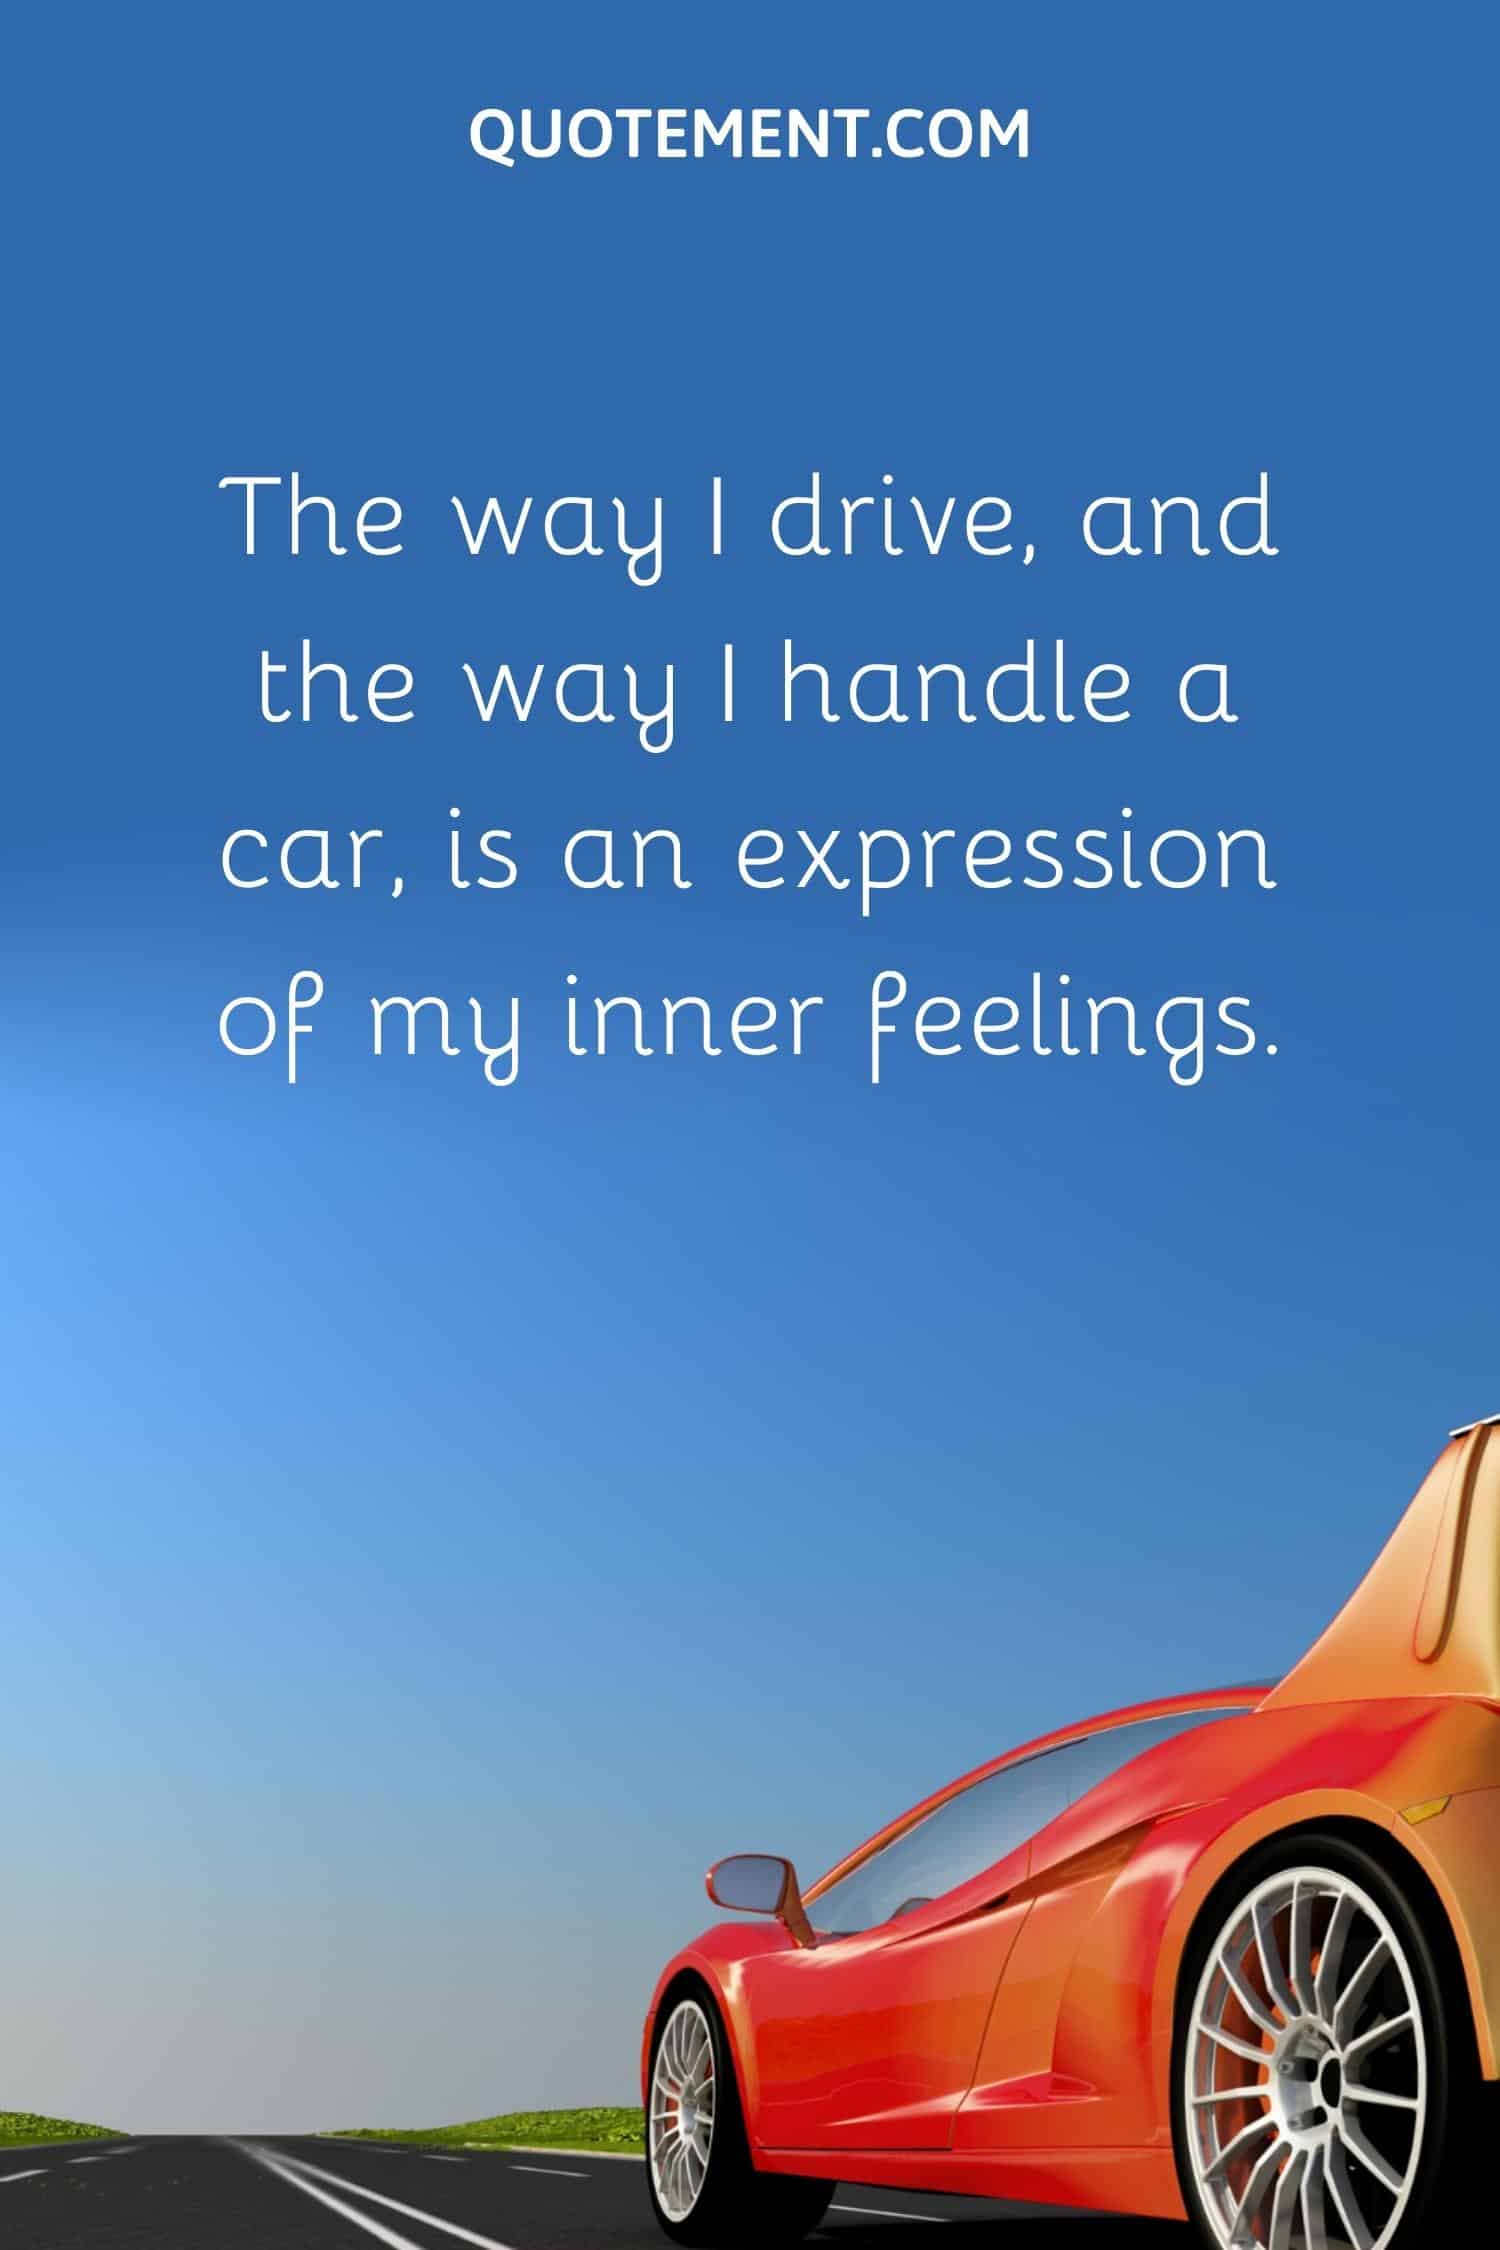 The way I drive, and the way I handle a car, is an expression of my inner feelings